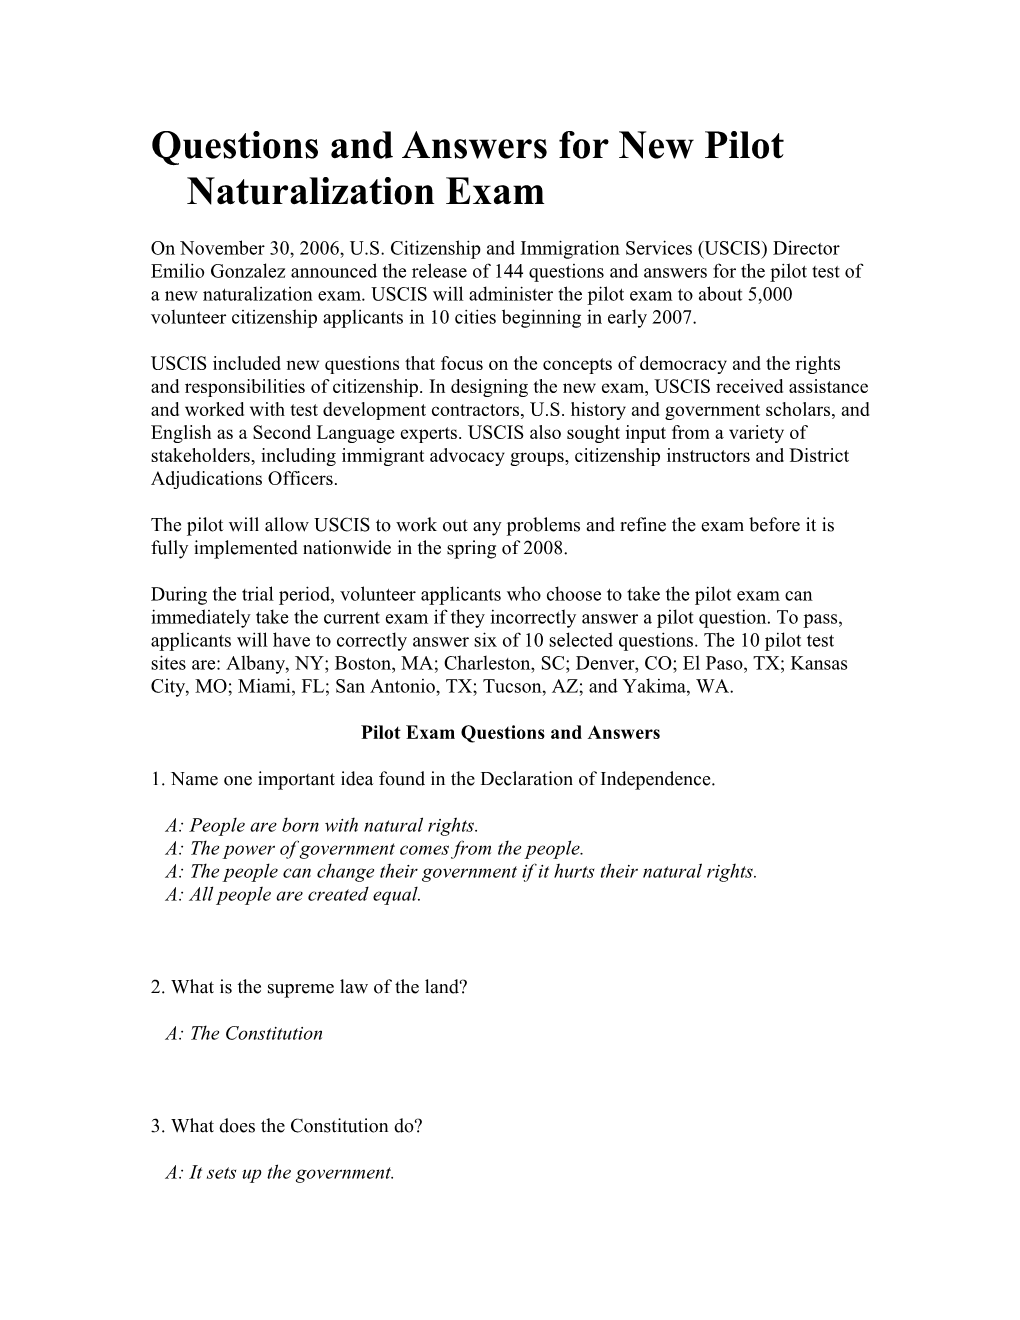 Questions and Answers for New Pilot Naturalization Exam